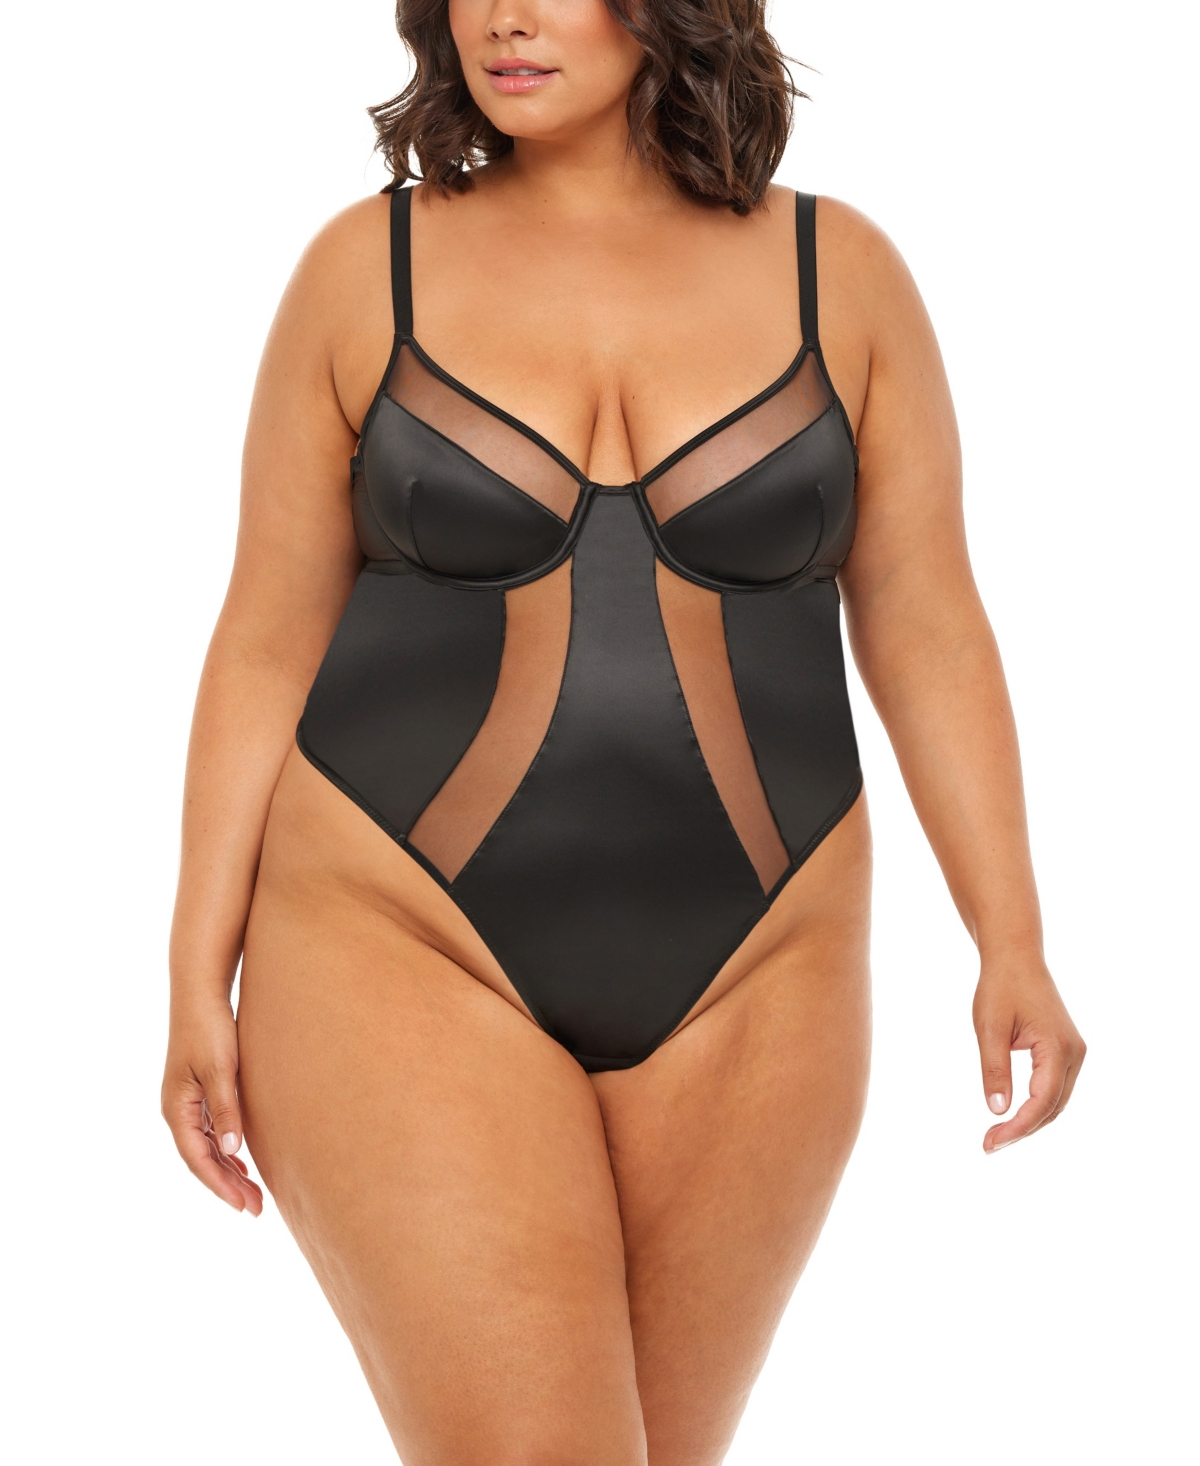 Women's Plus Size Royale Unlined Underwire Teddy with Sheer Illusion Detail - Black